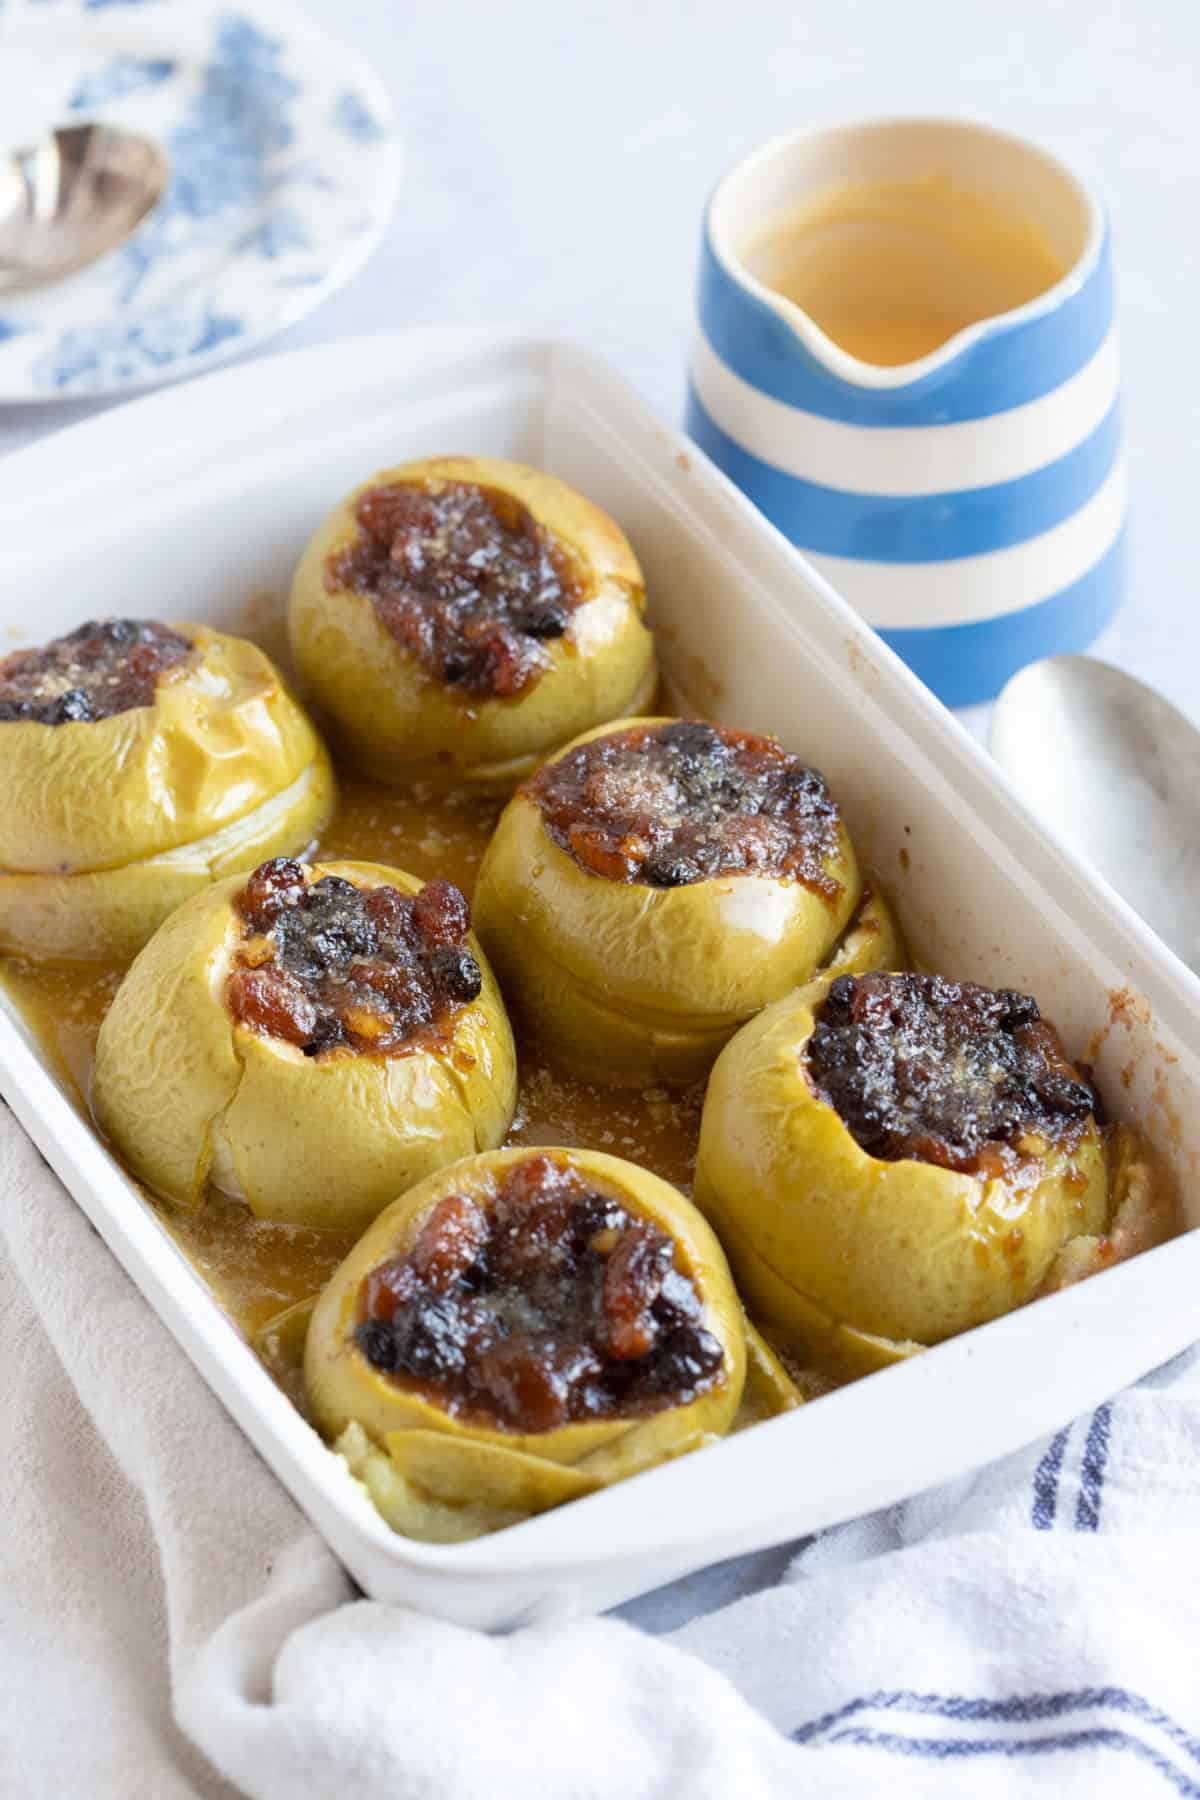 Baked apples in a white pie dish with a jug of custard.